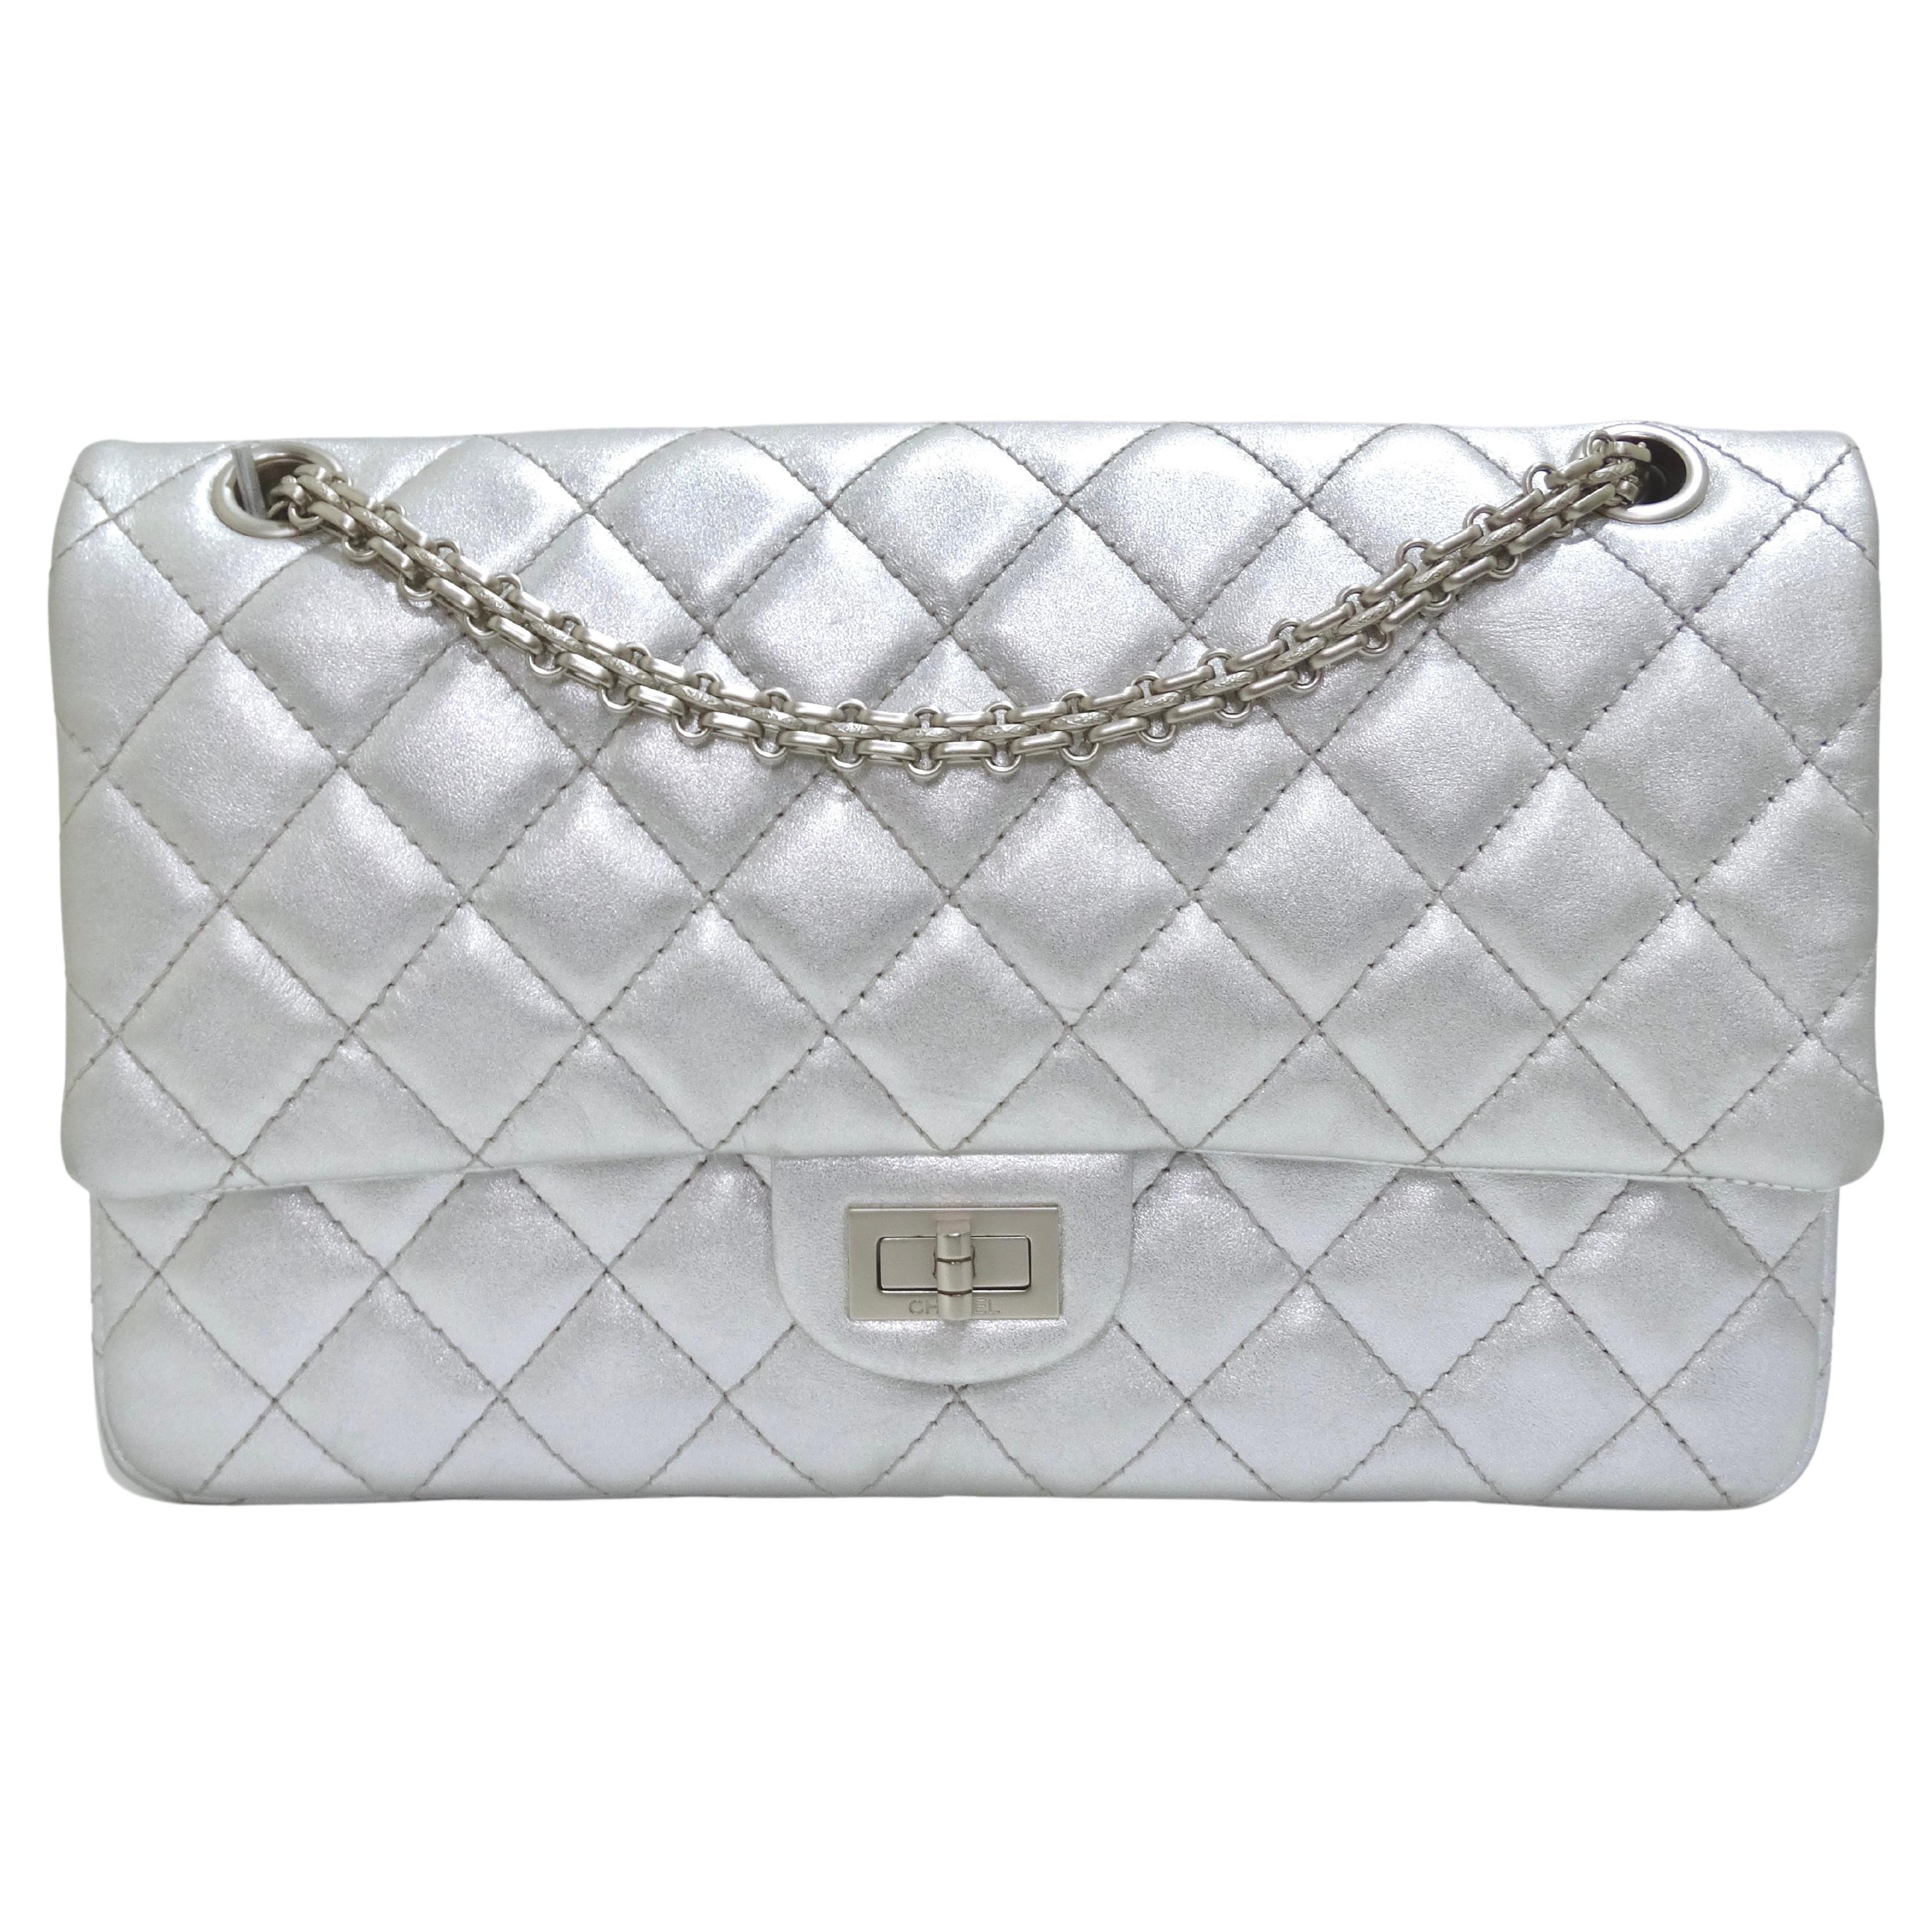 white chanel 2.55 double